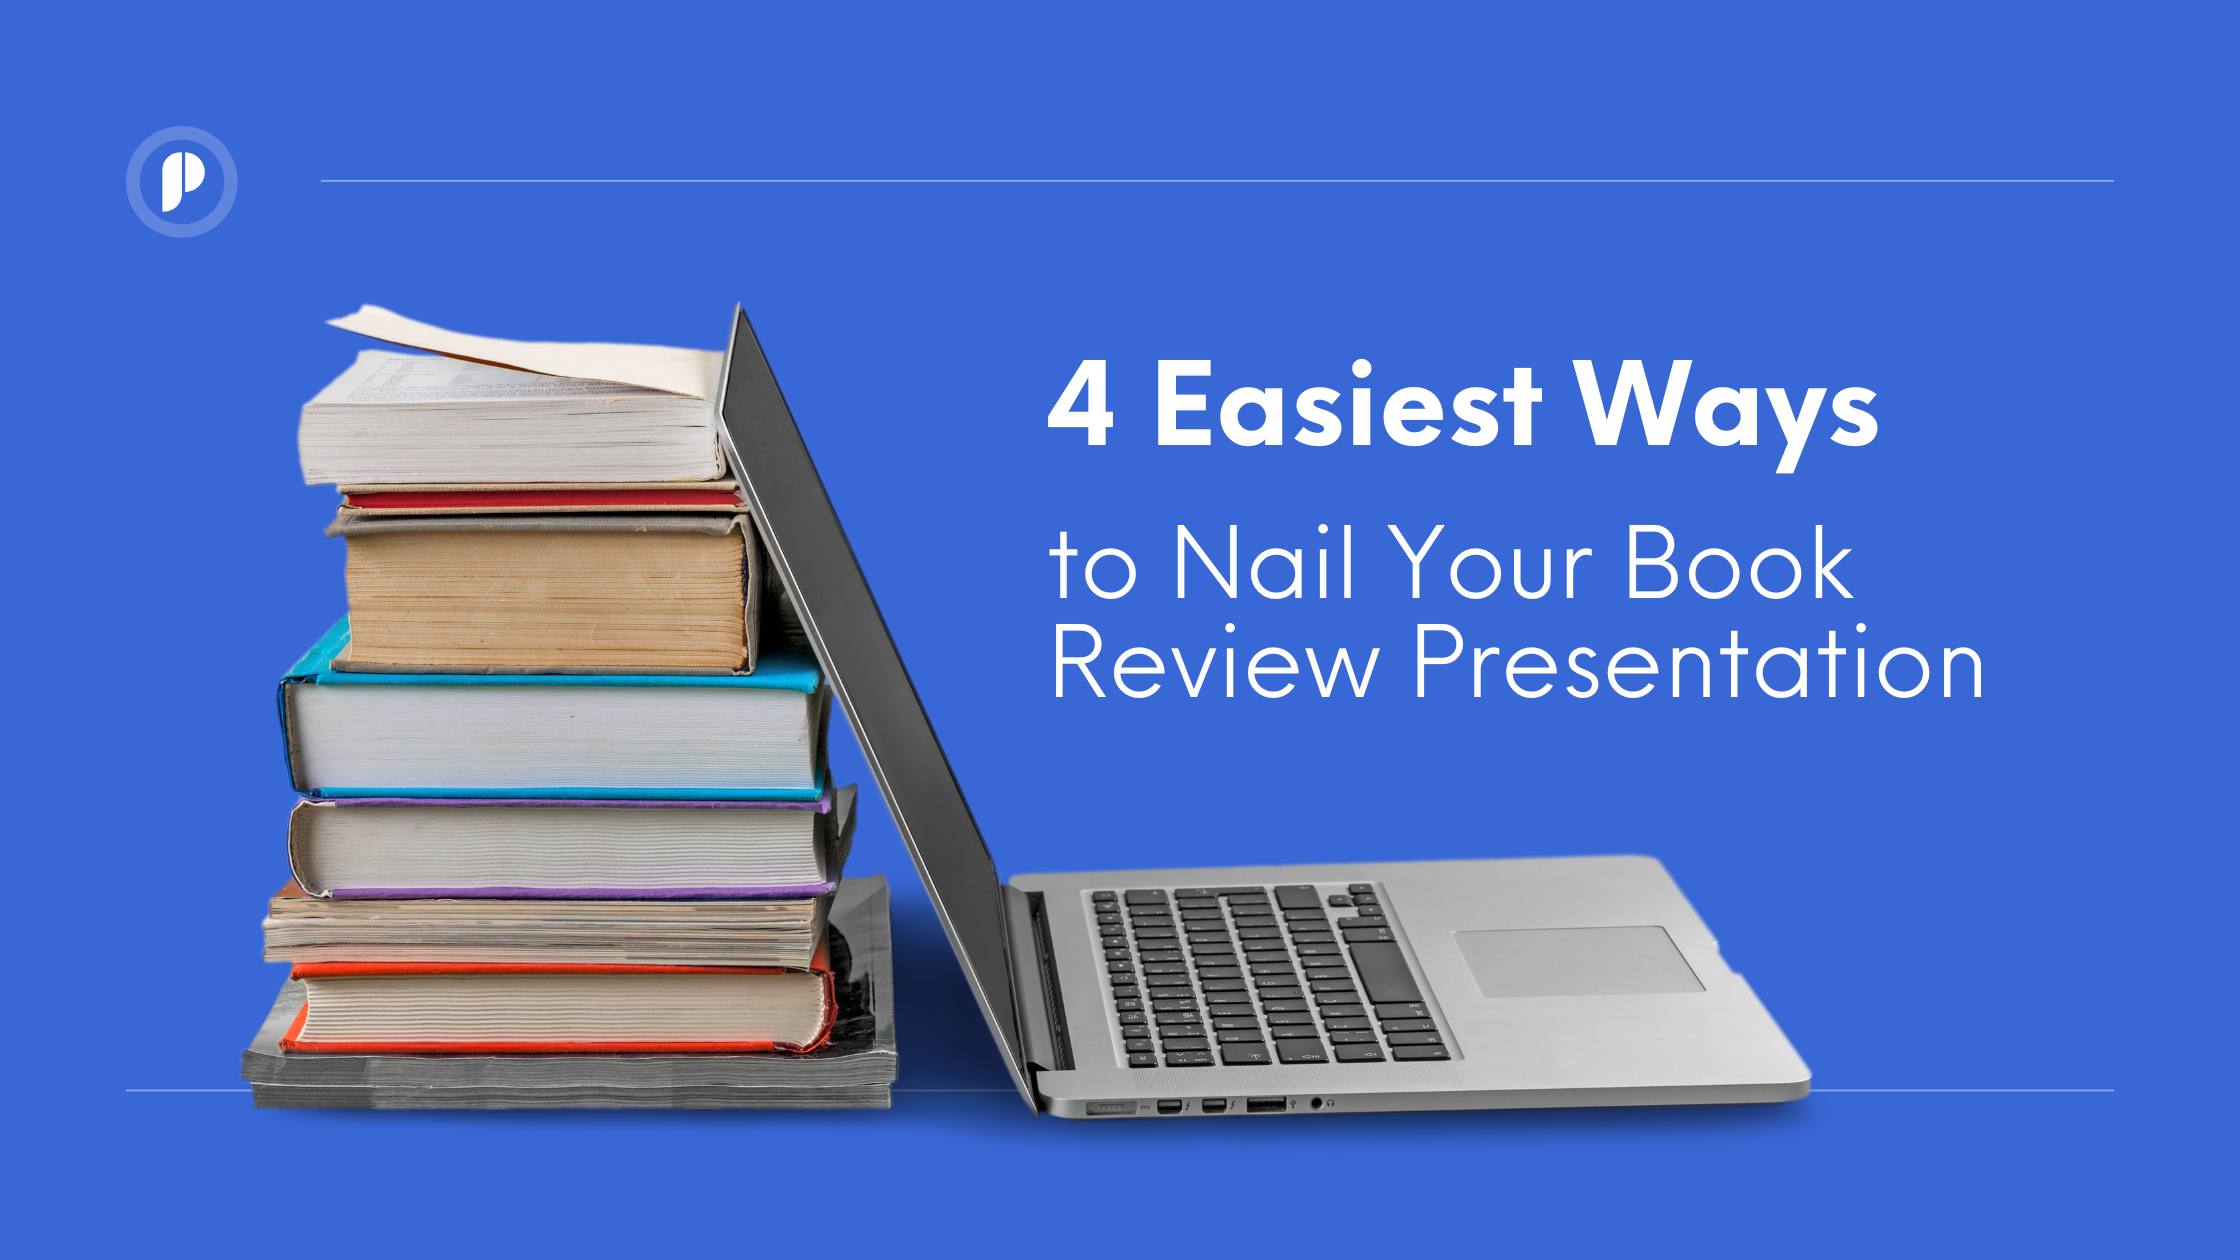 4 Easiest Ways to Nail Your Book Review Presentation - Peterdraw Studio